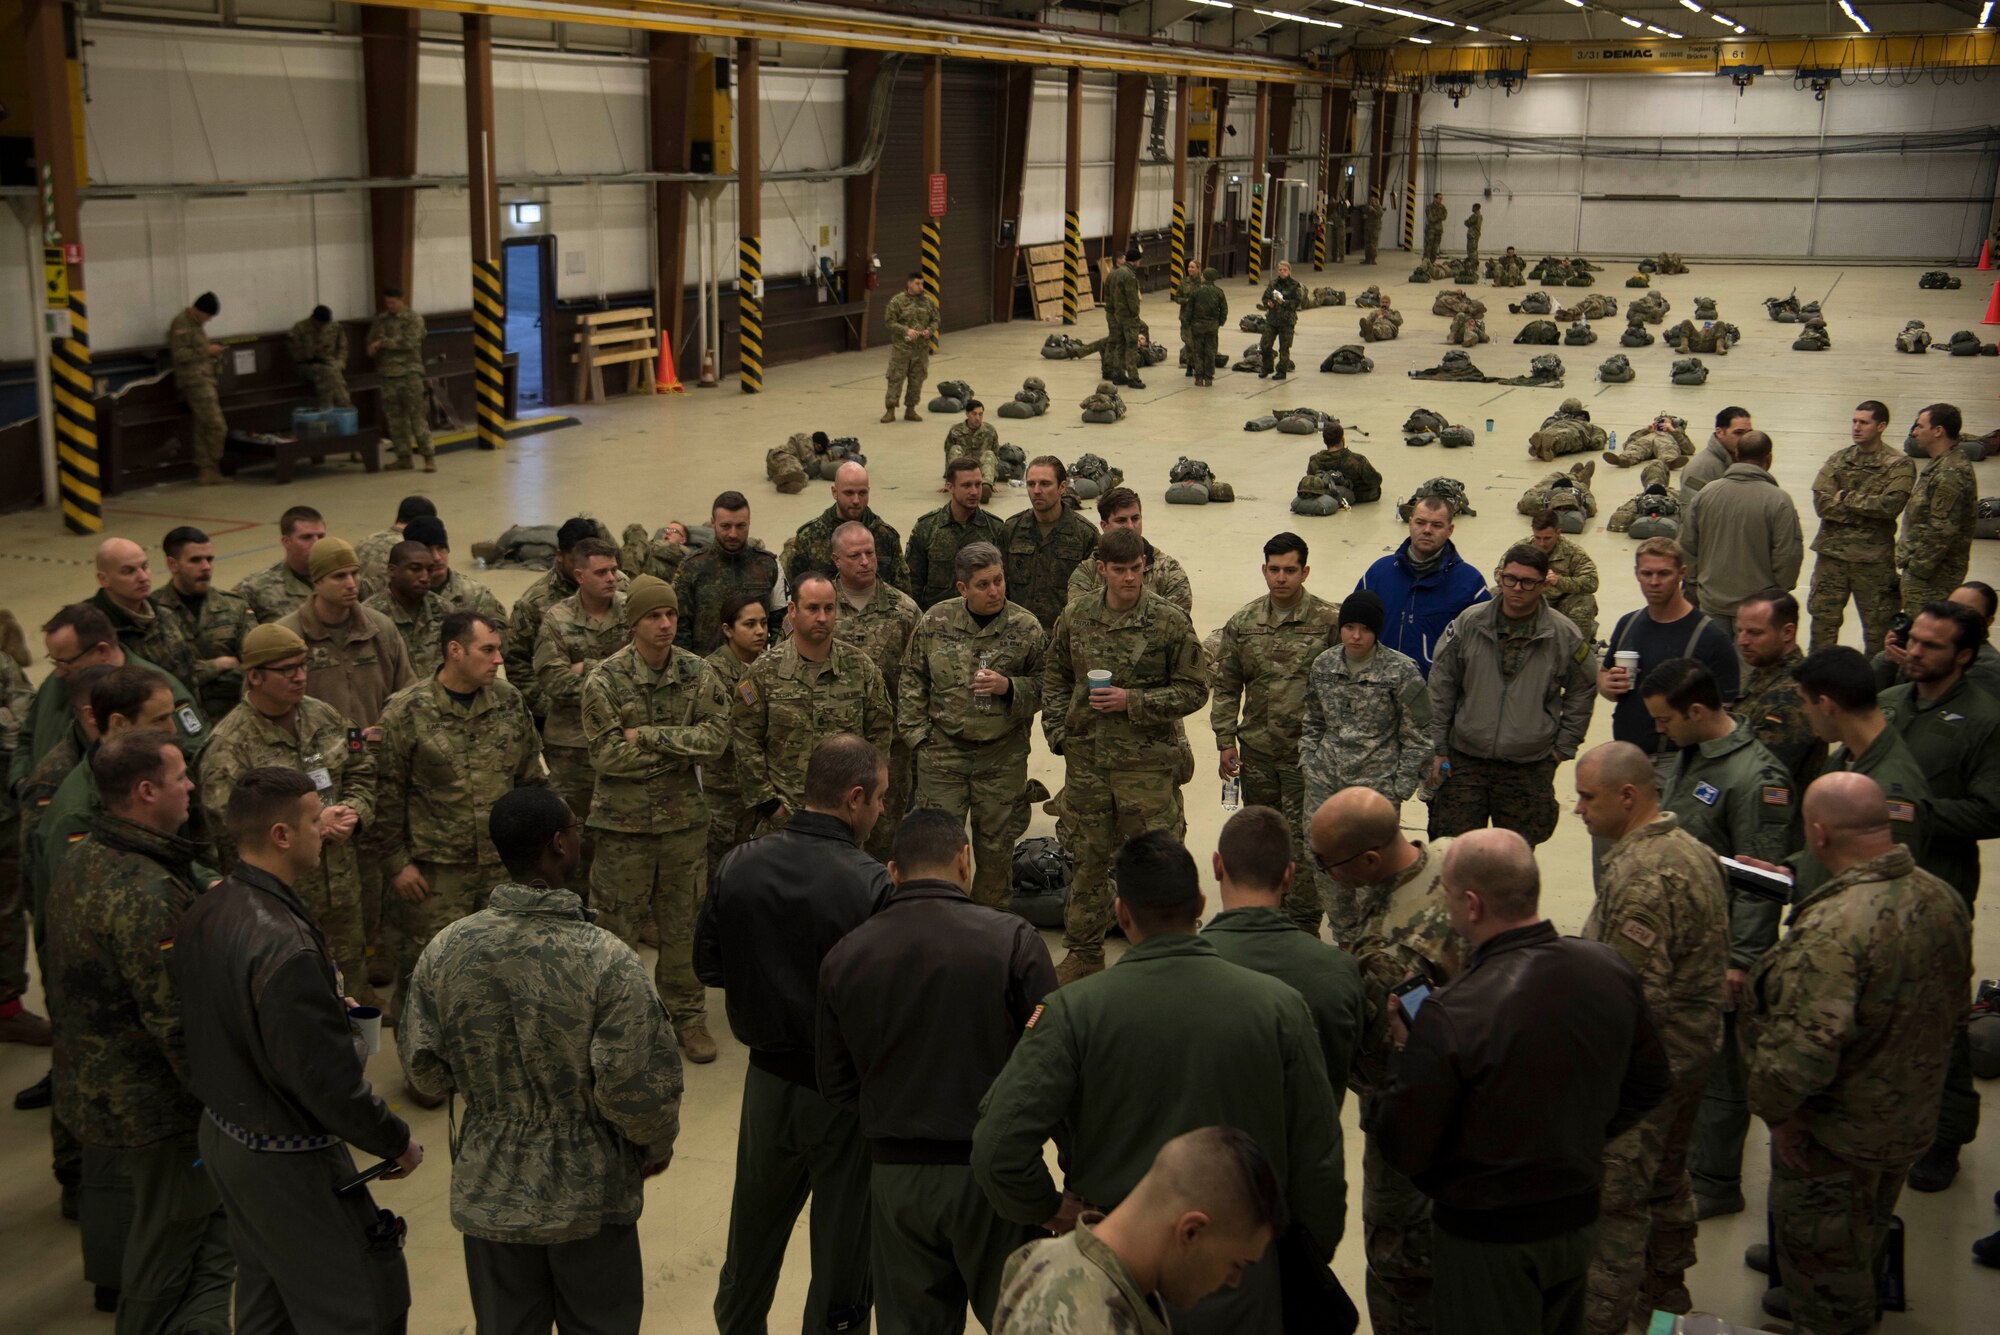 Members of the U.S. Air Force, U.S. Army, German, Italian, Dutch, British, and Estonian militaries, receive a mission brief before gearing up for Operation Toy Drop 2017 on Ramstein Air Base, Germany, Dec. 6, 2017. The paratroopers participated in Operation Toy Drop 2017 to maintain their military free fall and jump master proficiencies, and to improve NATO interoperability. (U.S. Air Force photo by Senior Airman Devin M. Rumbaugh)